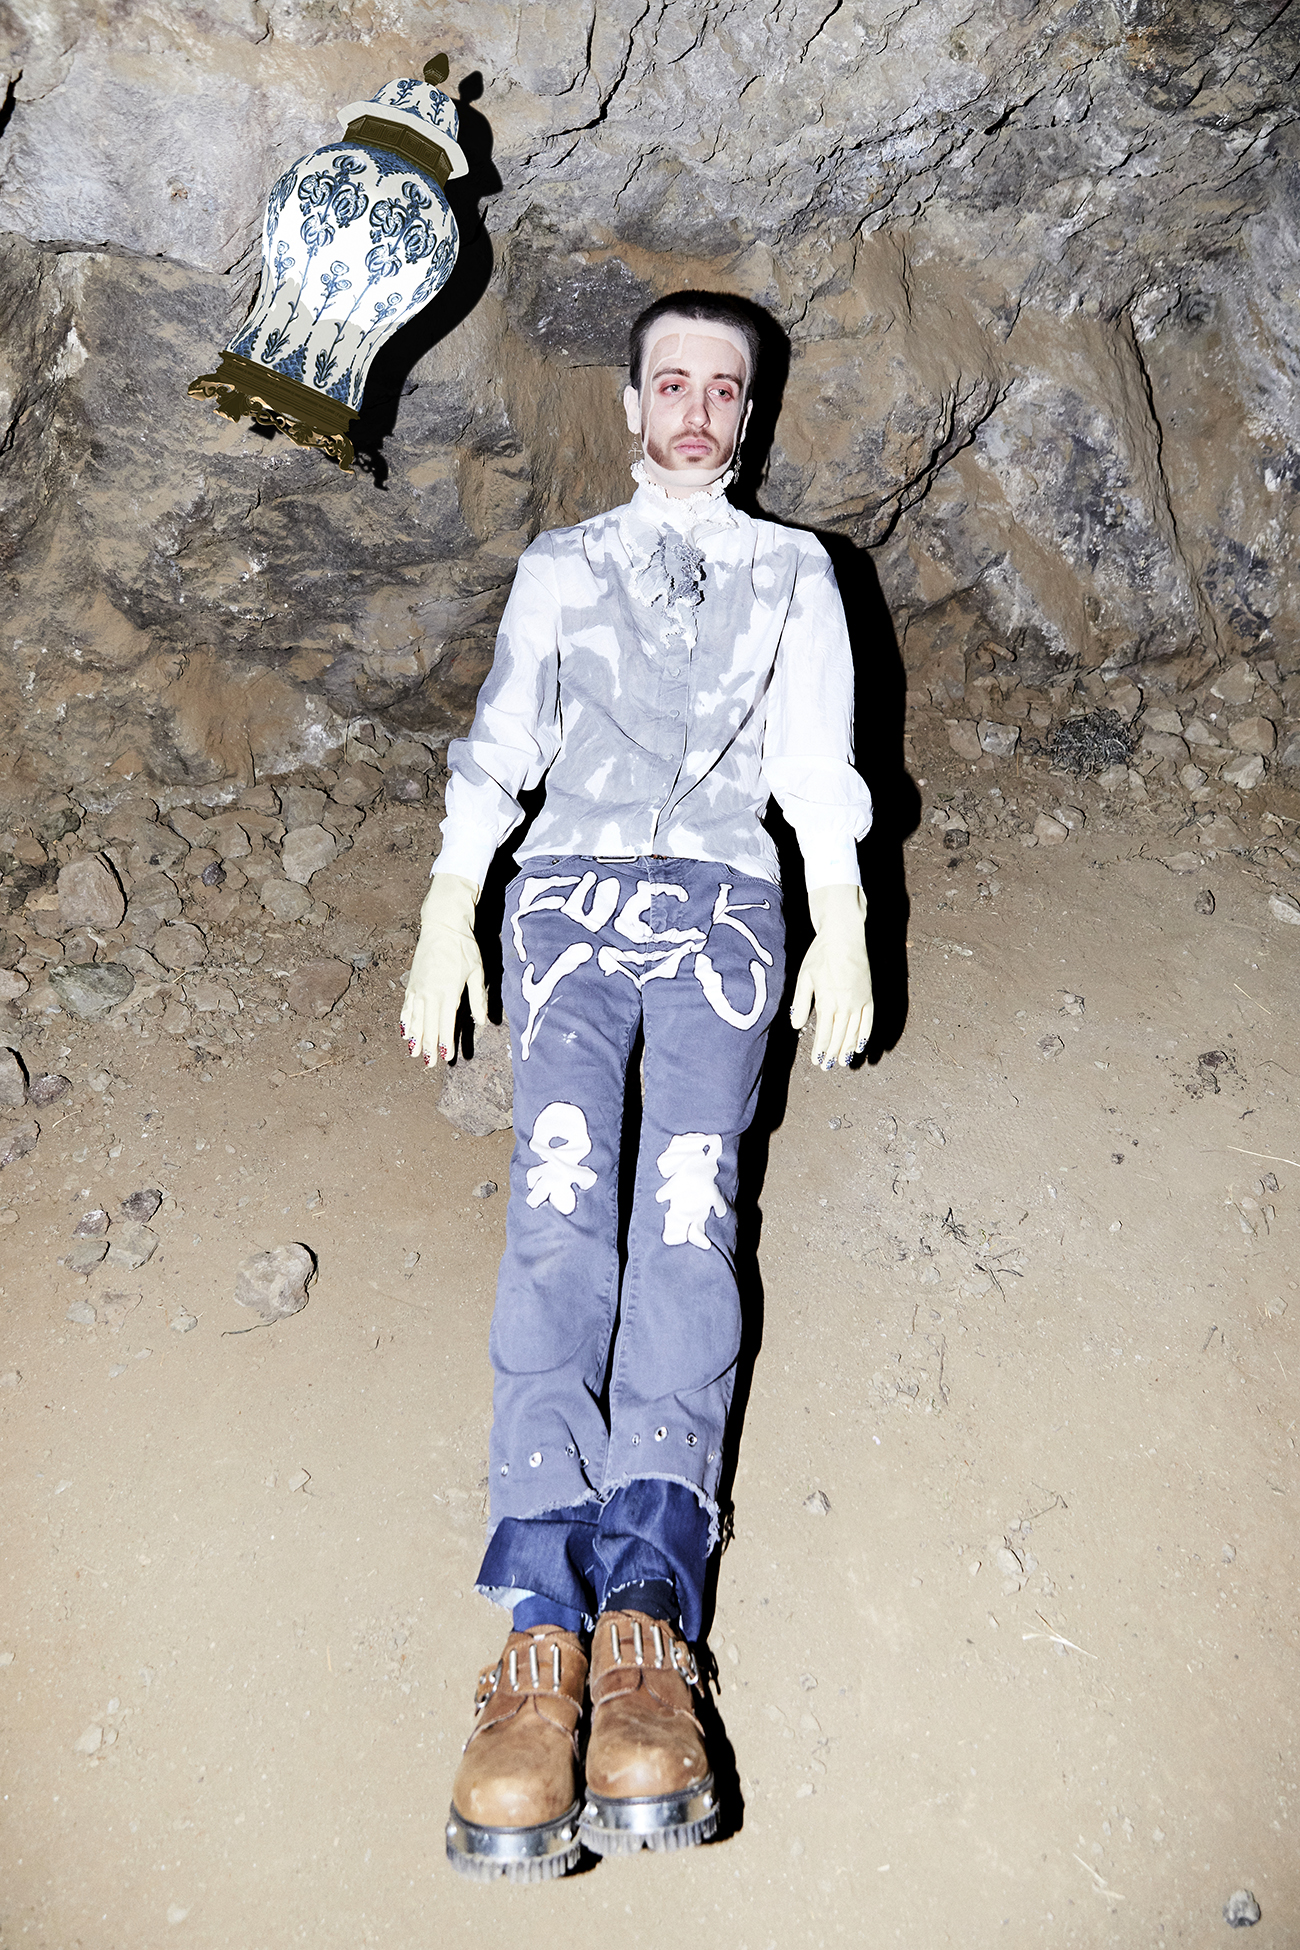 Full body shot of Jesse levitating in a cave